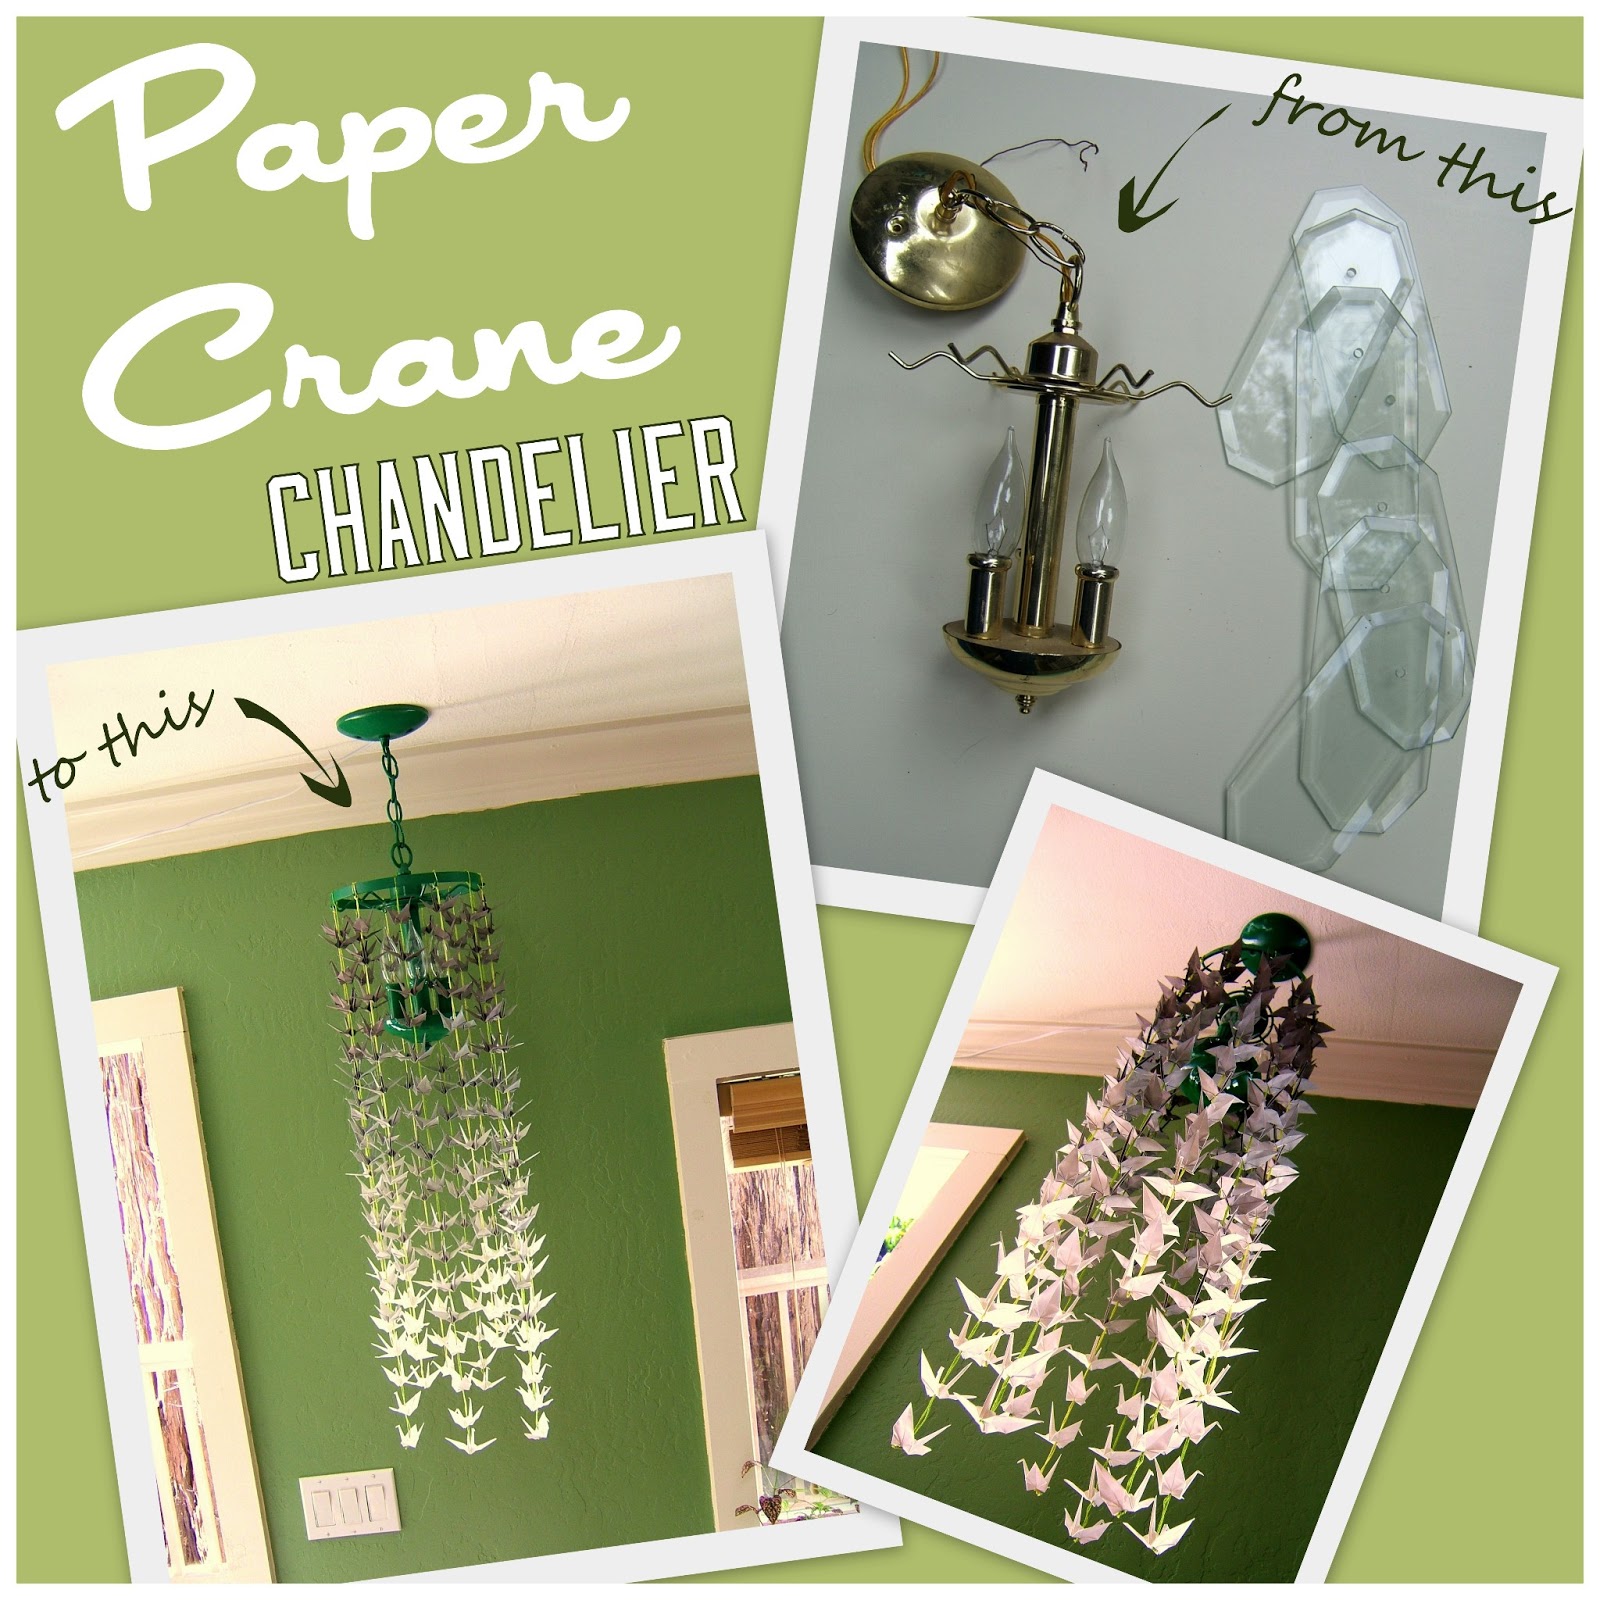 How To Tuesday – Hanging Bat Chandelier – My Paper Crane